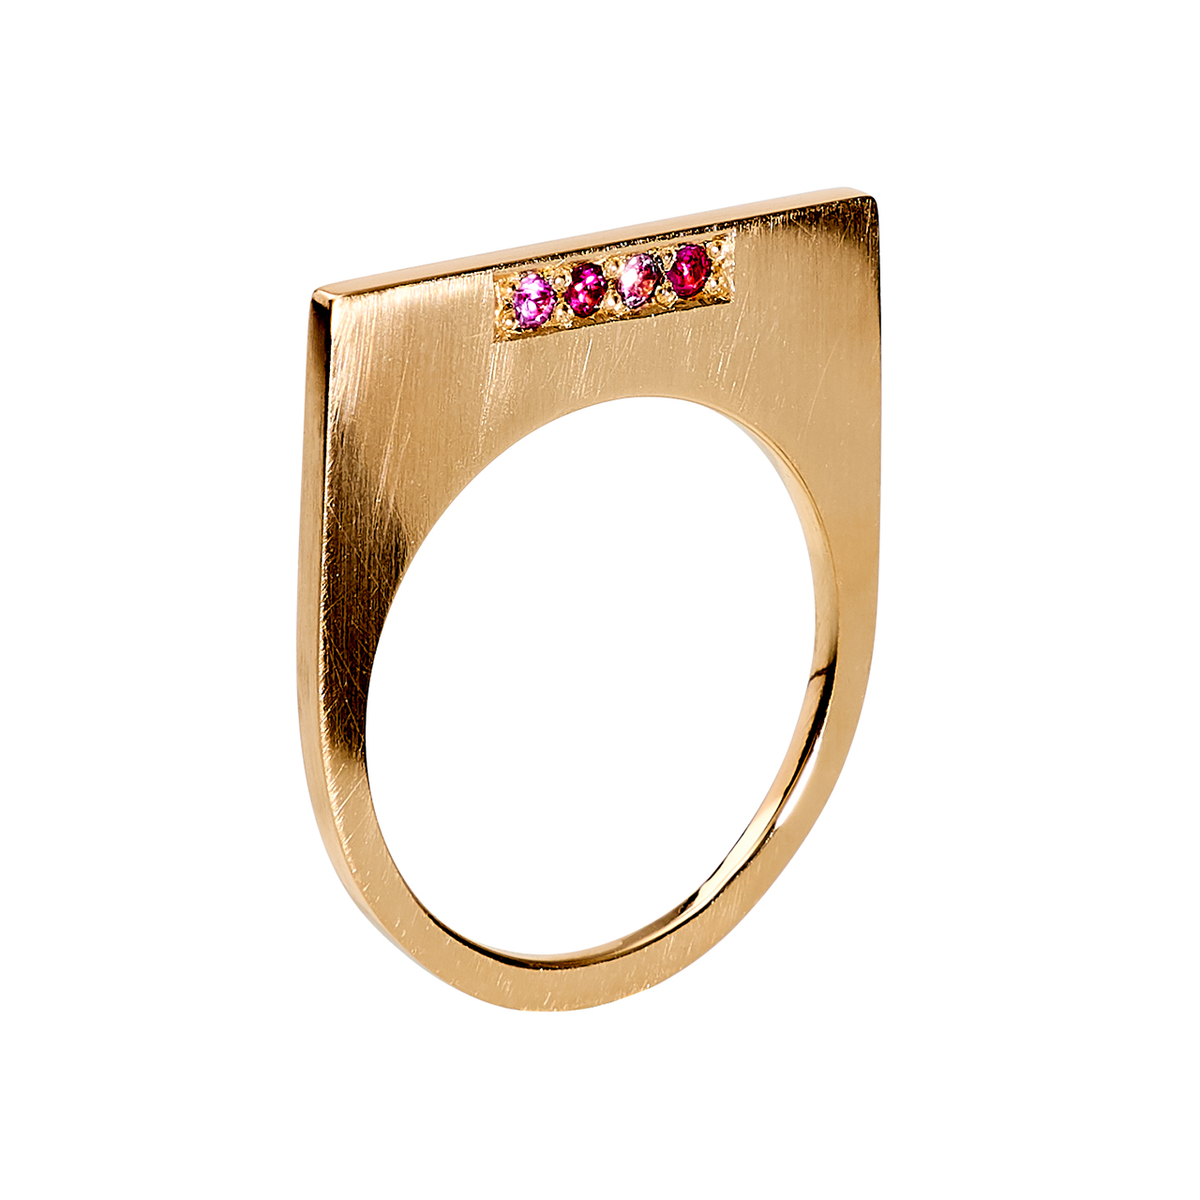 SIGNET RING - RUBY & SAPPHIRES